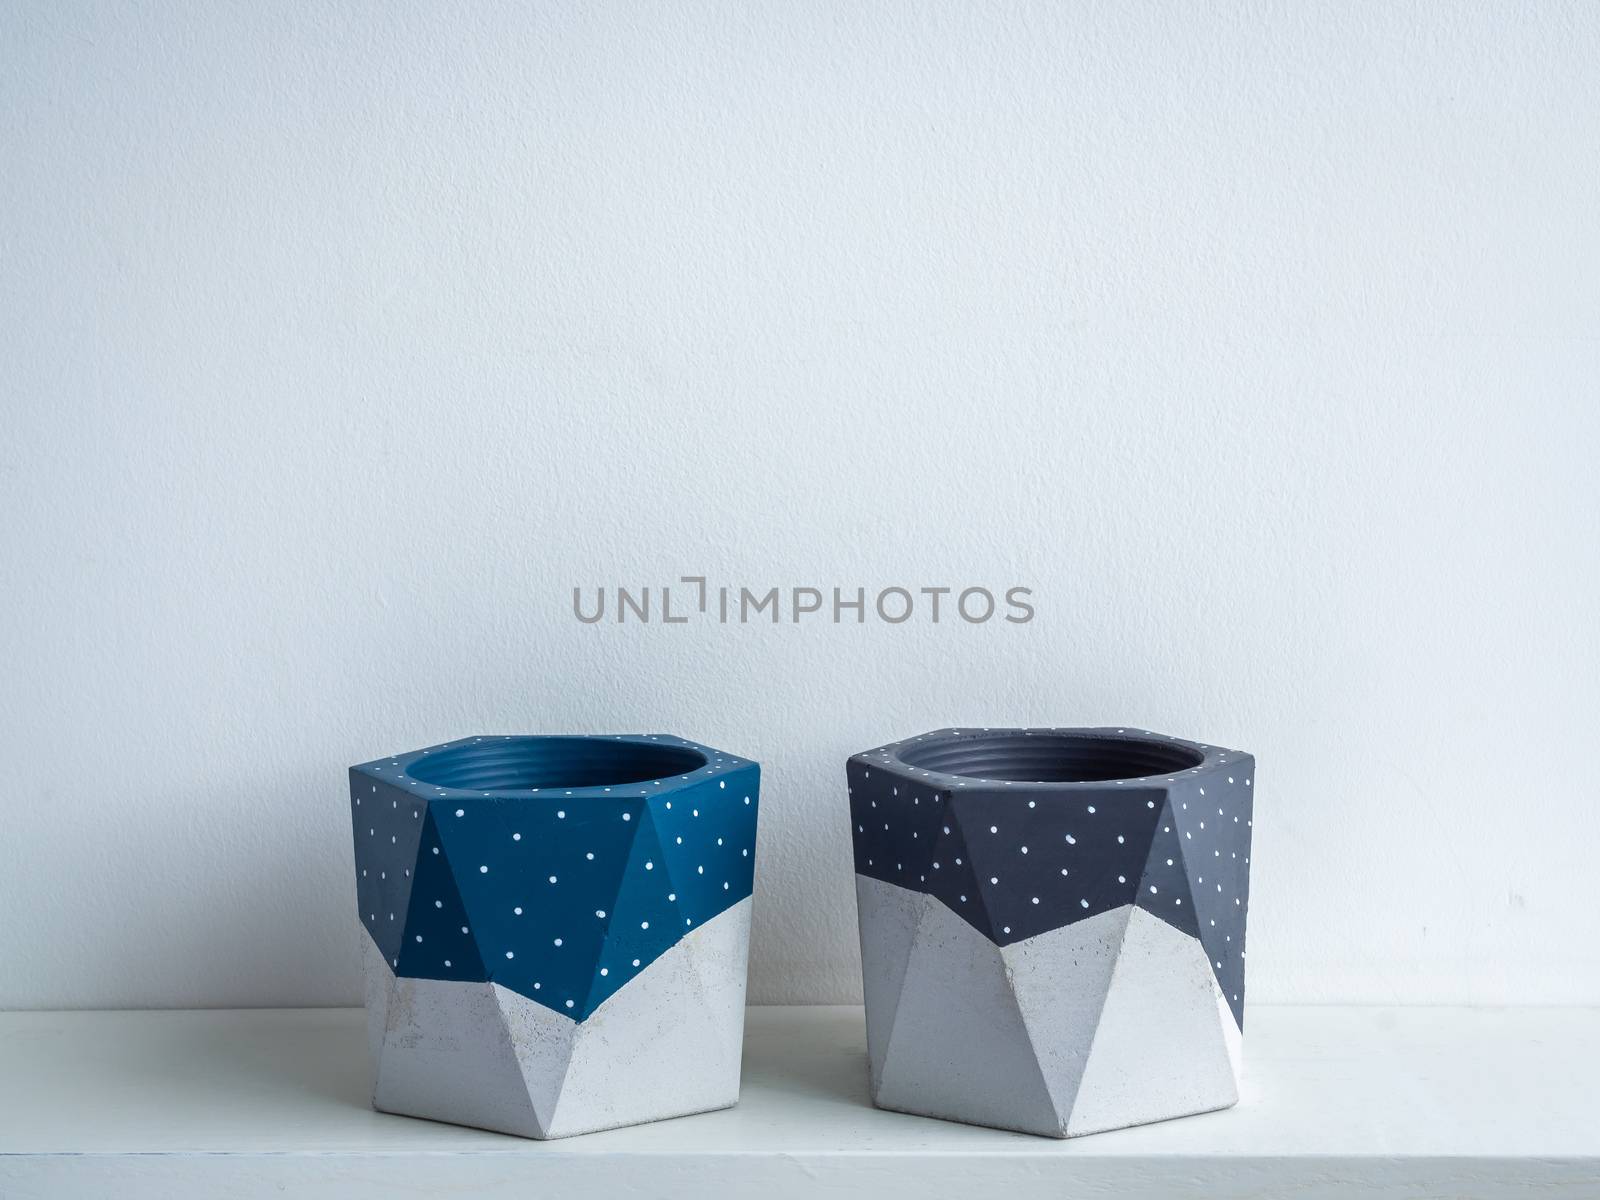 Cactus pot. Concrete pot. Empty blue and grey painted modern geometric concrete planters on white wooden shelf isolated on white background.